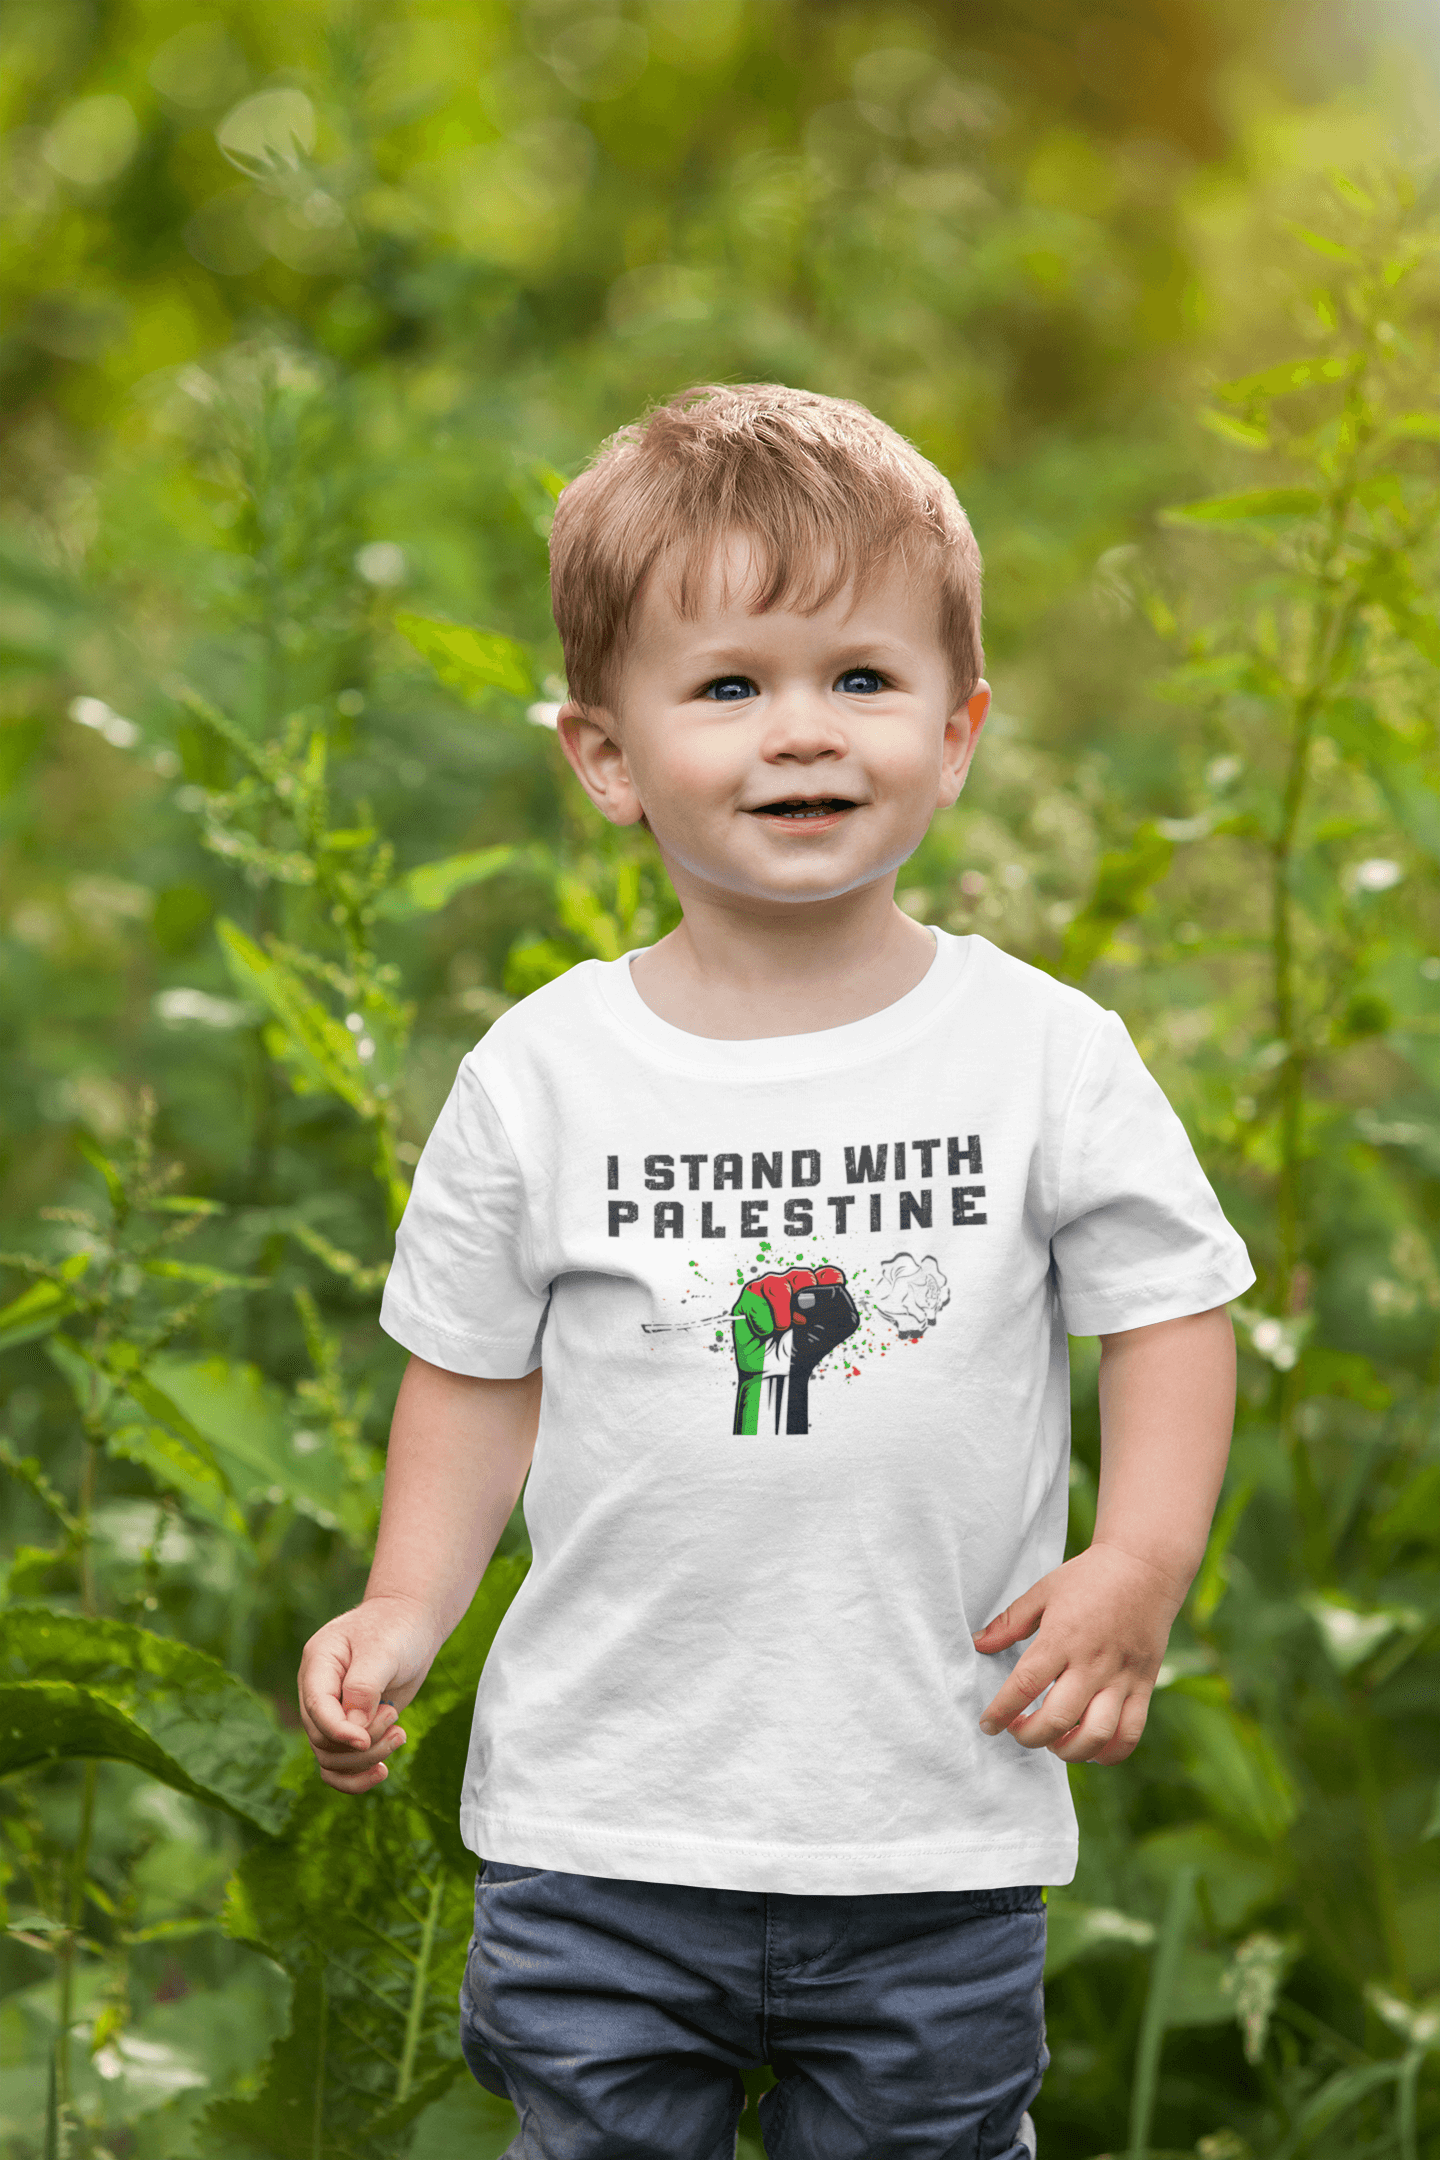 I STAND WITH PALESTINE Toddler Tshirt 2T-4T - SunnahBay